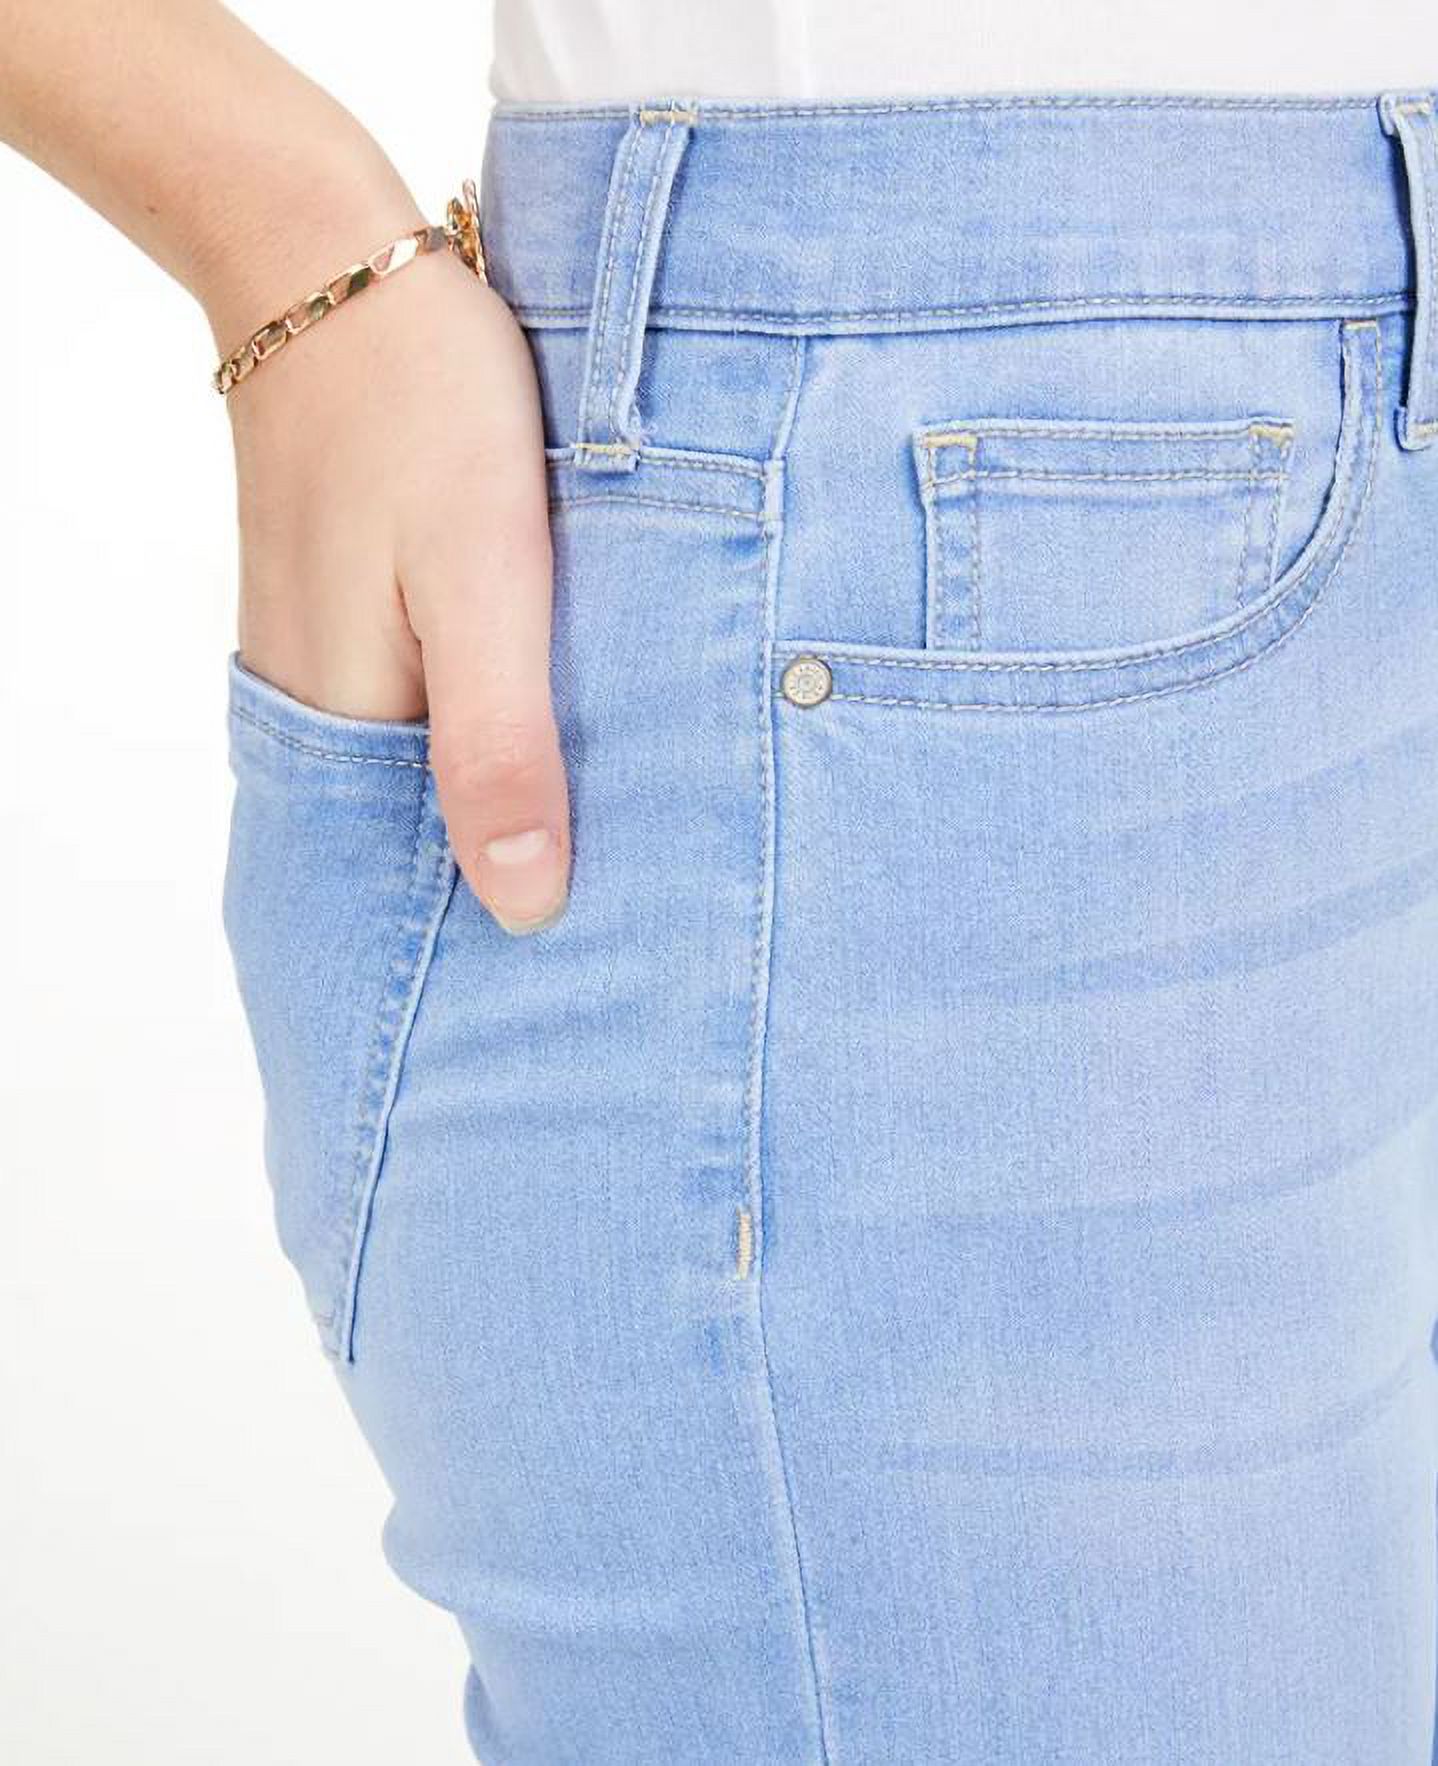 Celebrity Pink Girl's Blue Curvy Cuffed High-Rise Cropped Jeans, 0/24 - image 5 of 5